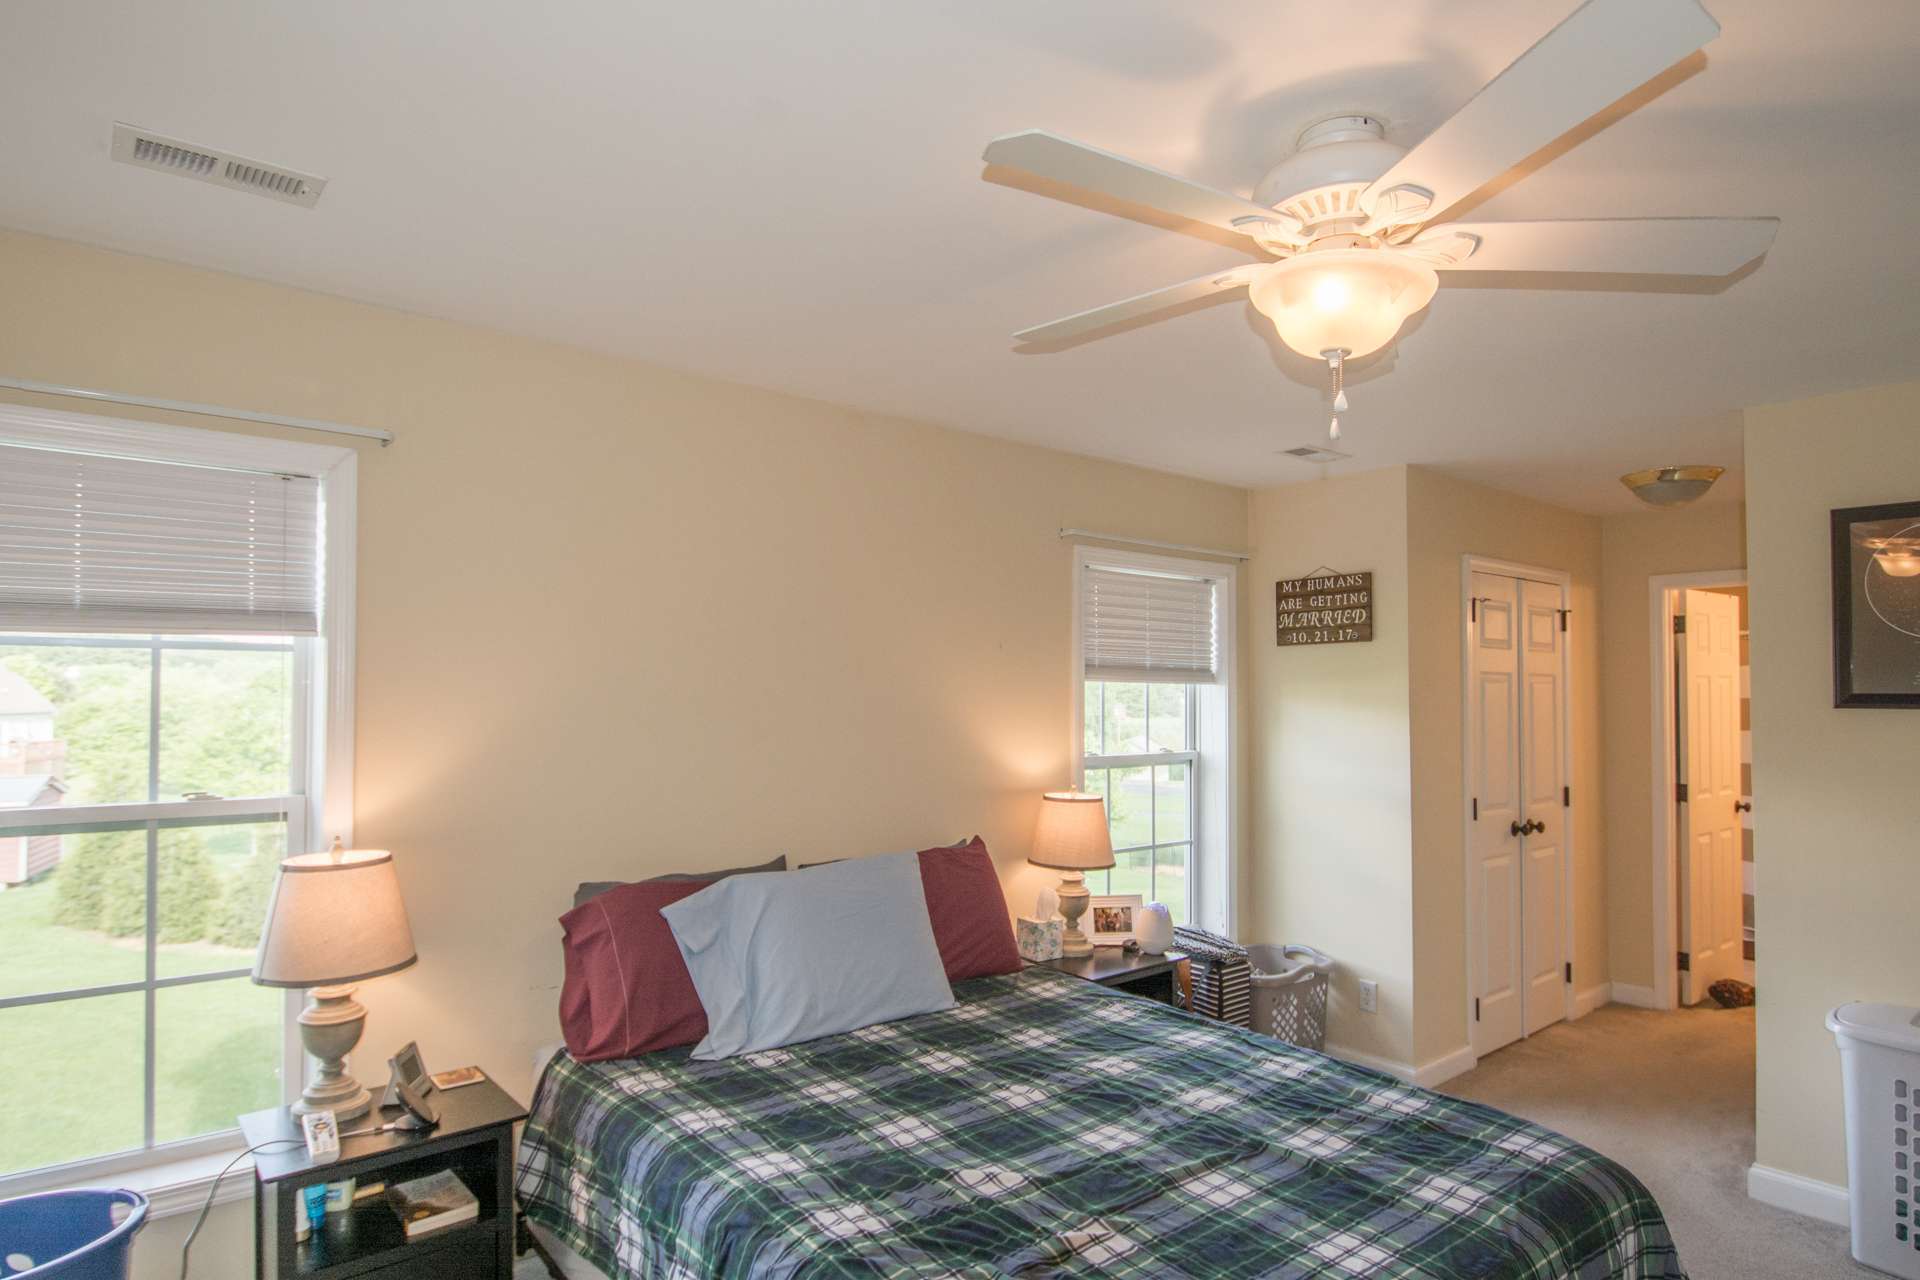 The master suite is located on the upper level and offers double closets and a private bath with double vanity.